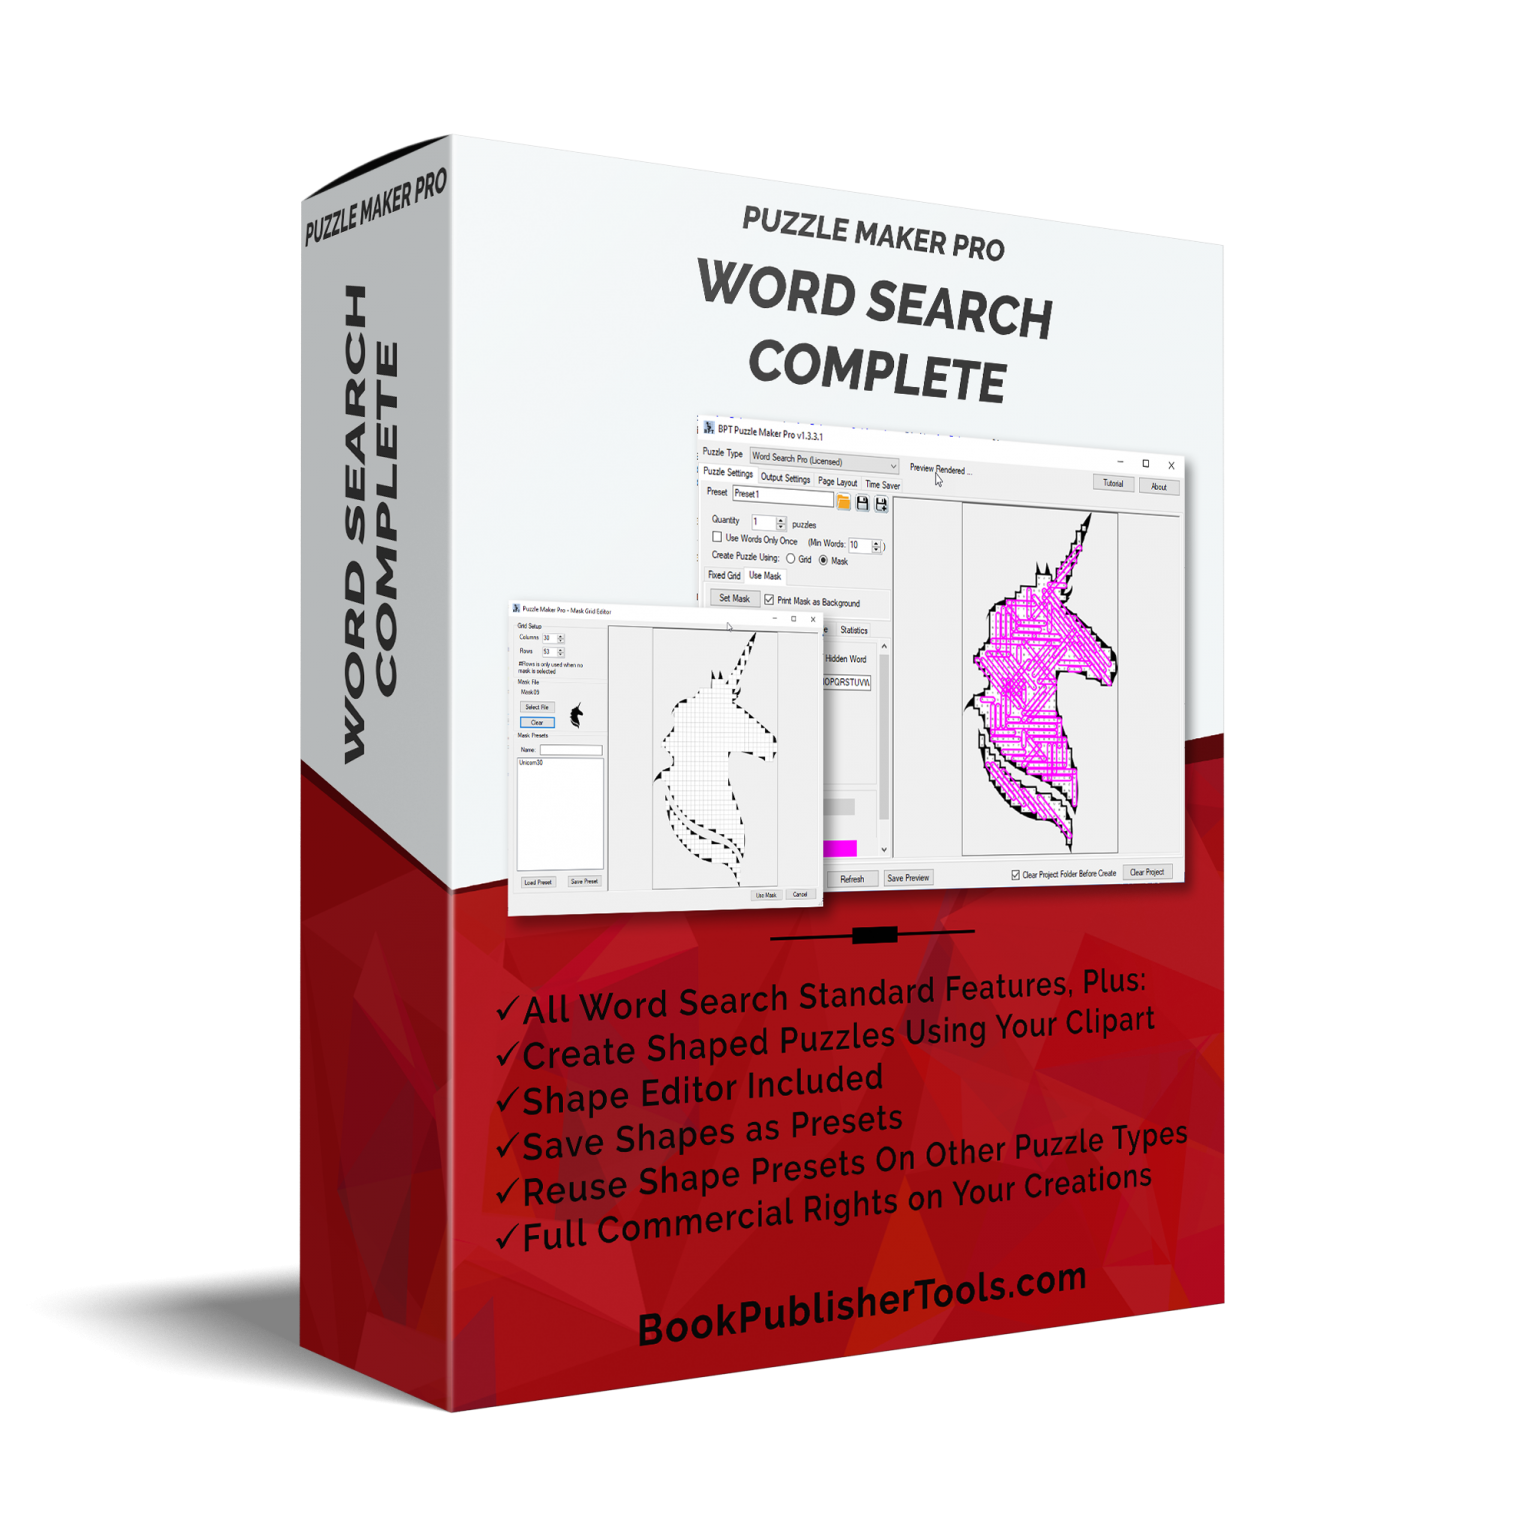 Puzzle Maker Pro - Word Search Complete - BookPublisherTools